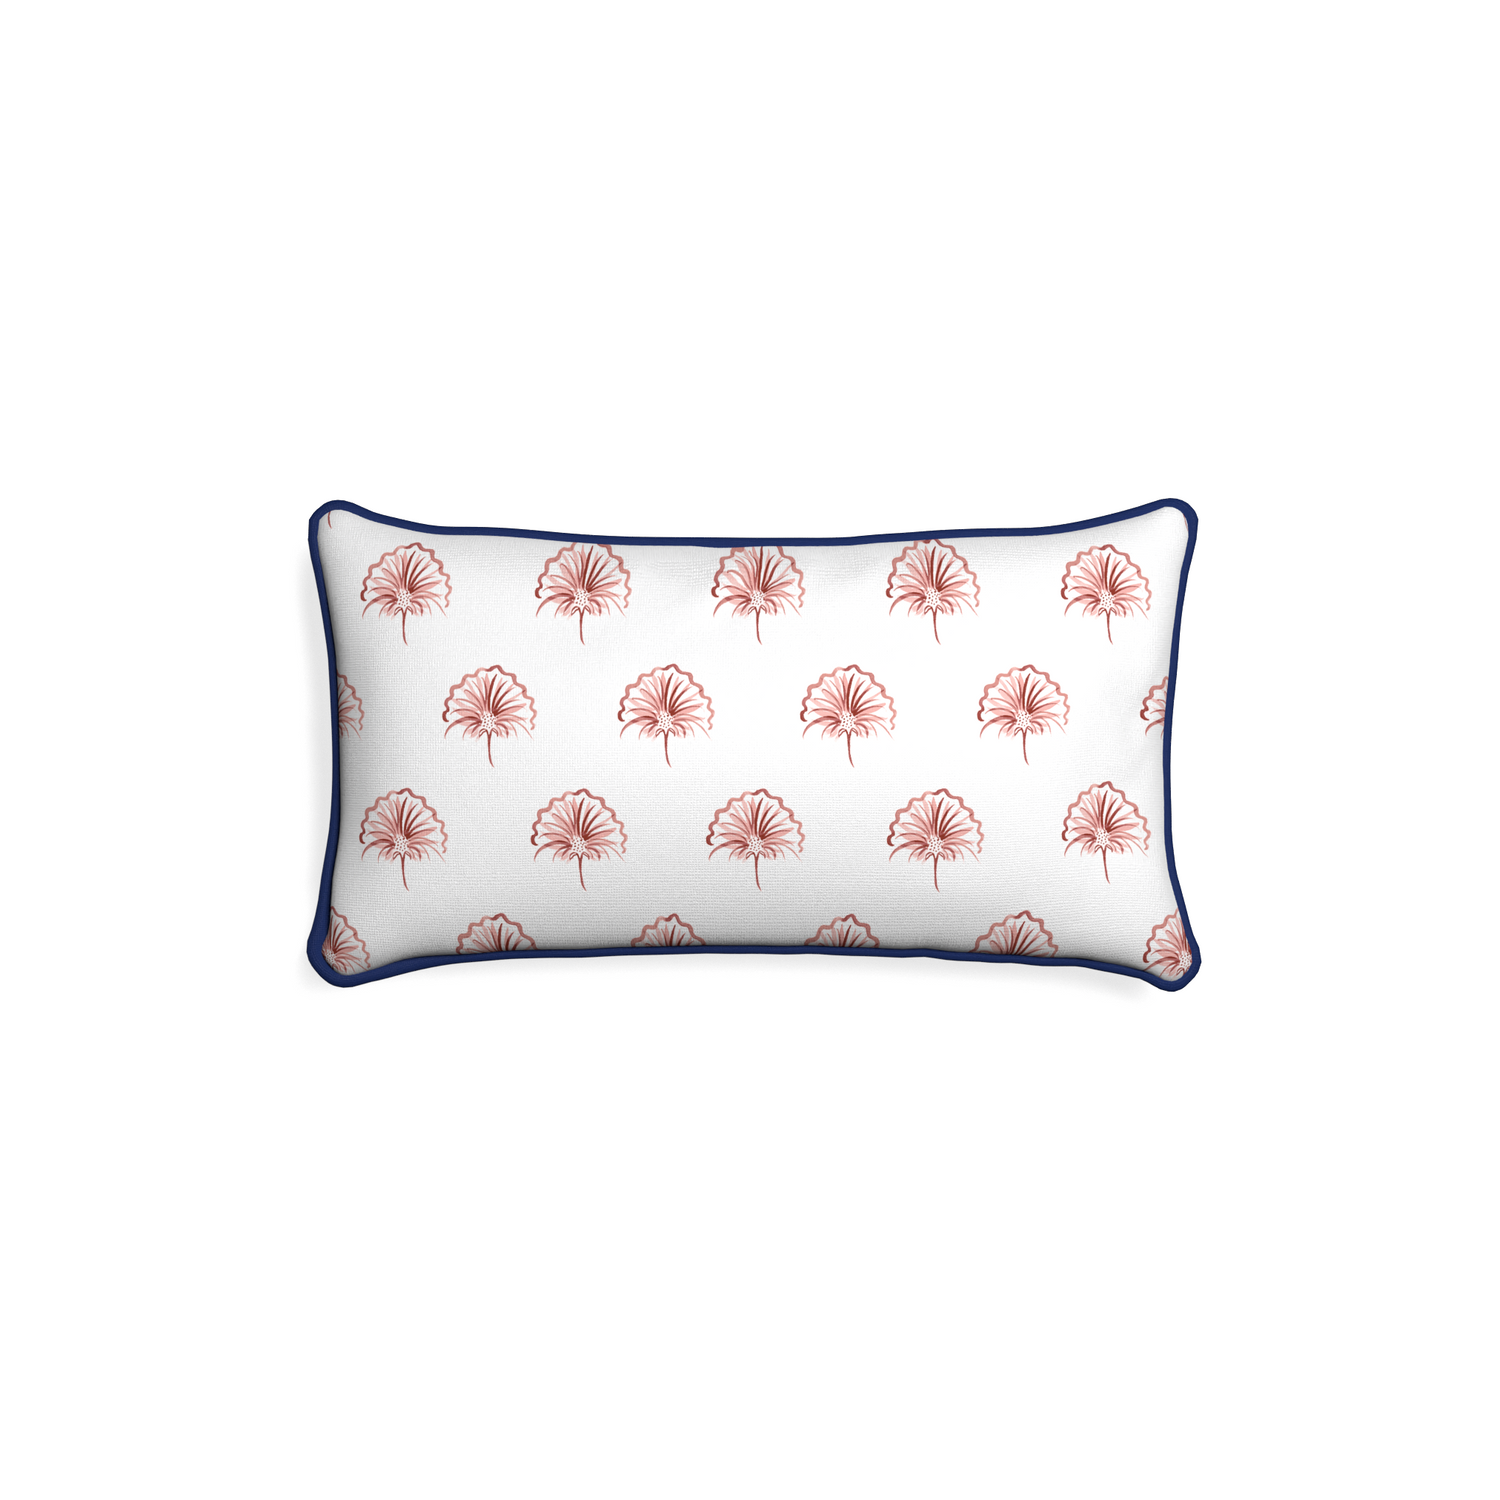 Petite-lumbar penelope rose custom floral pinkpillow with midnight piping on white background